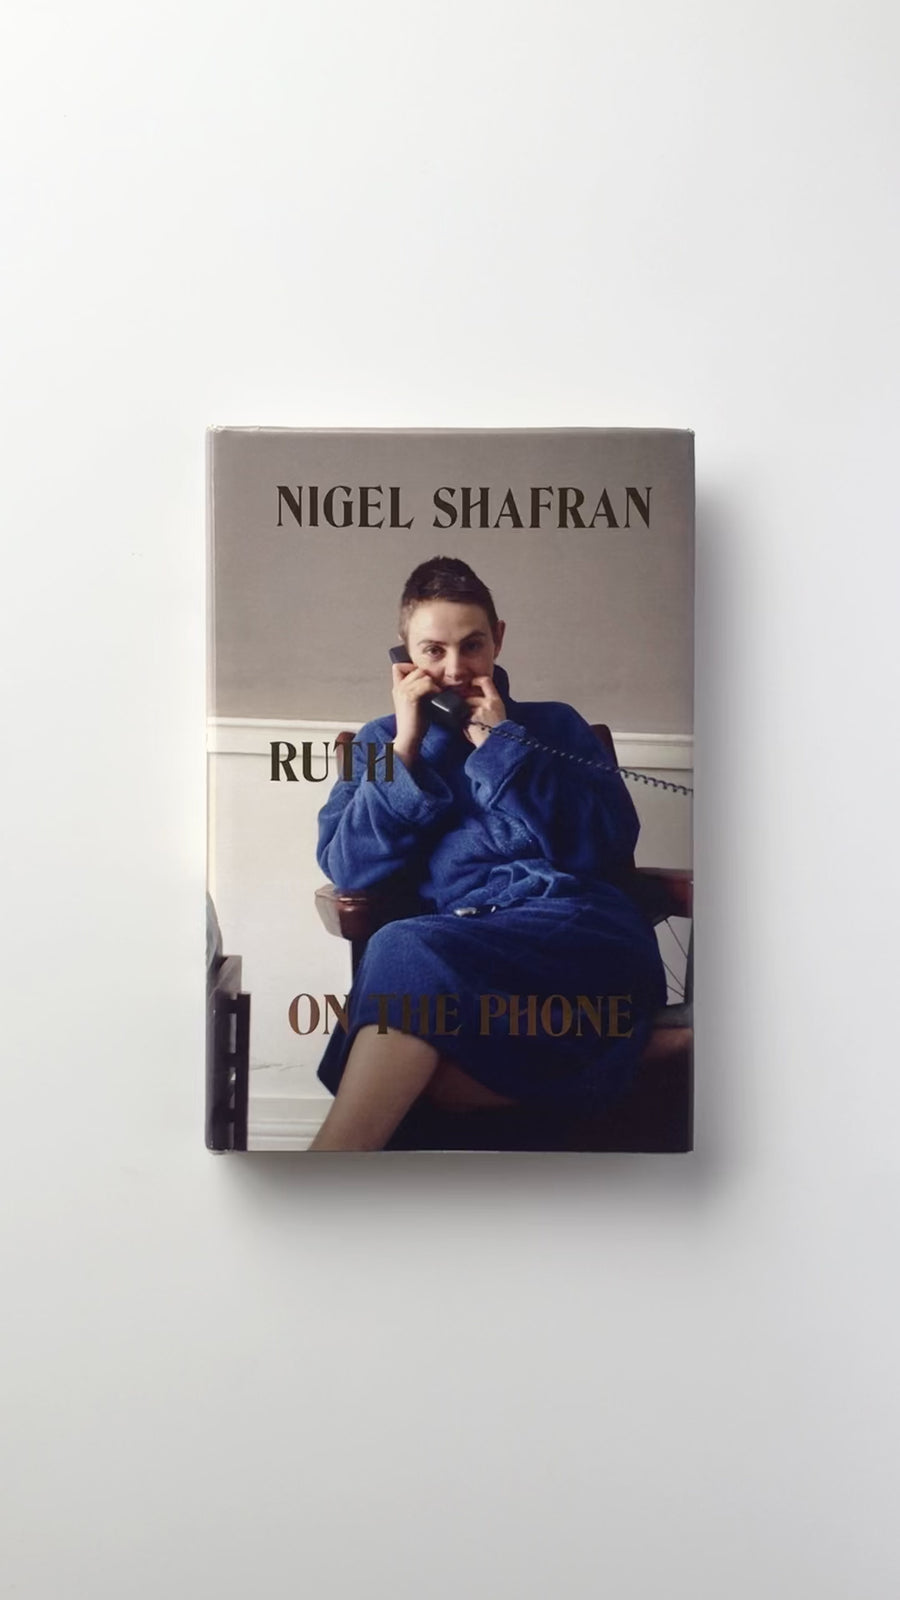 (Signed) Ruth on the phone by Nigel Shafran